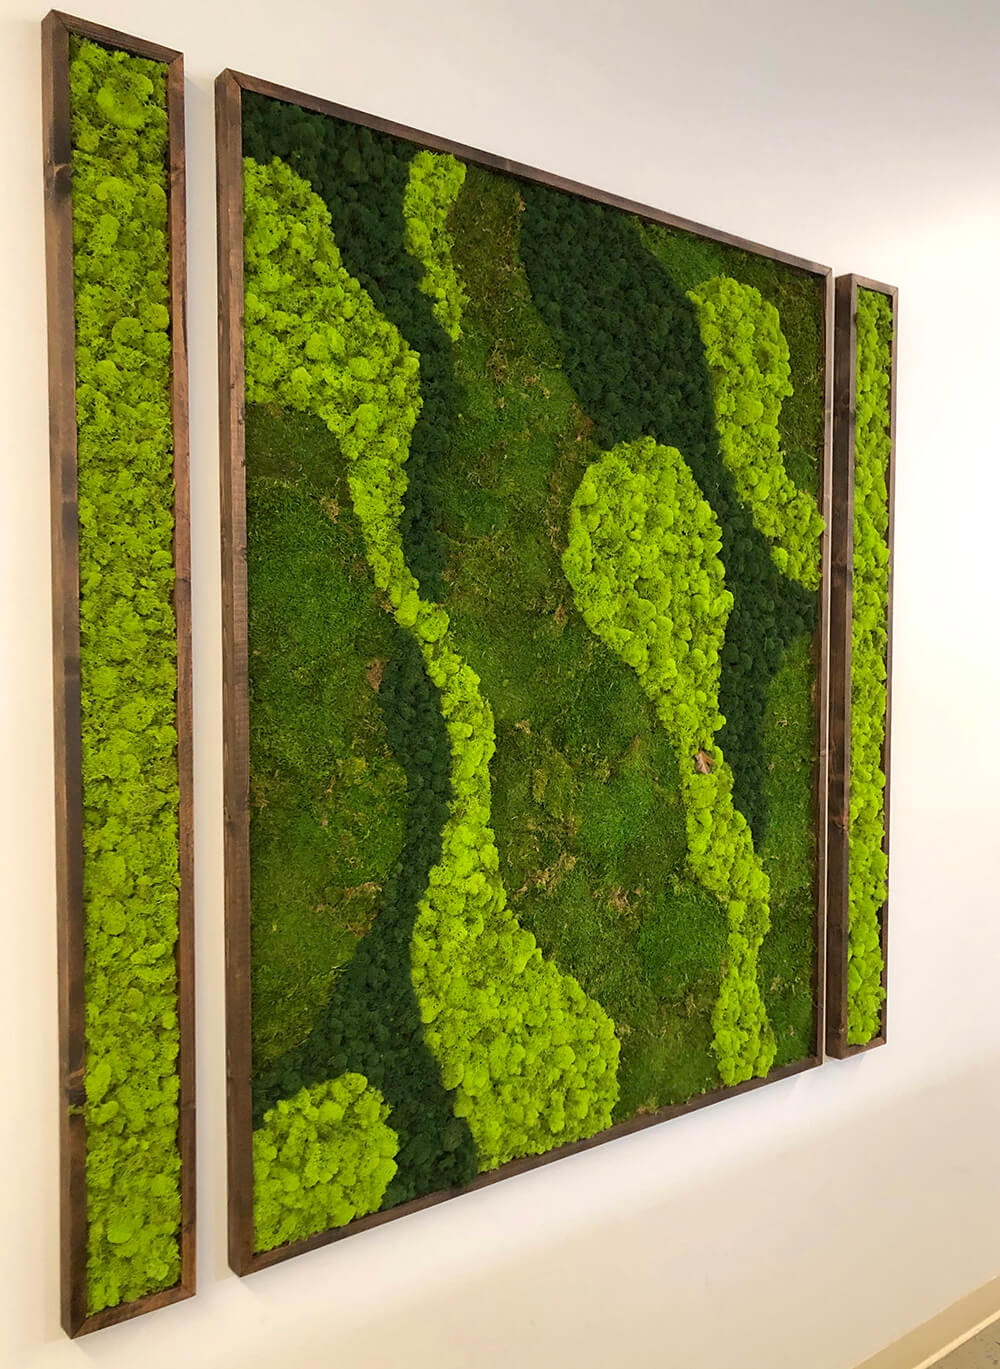 Preserved moss wall art utilizing a variety of preserved moss; reindeer and sheet moss. For eco-friendly interiors